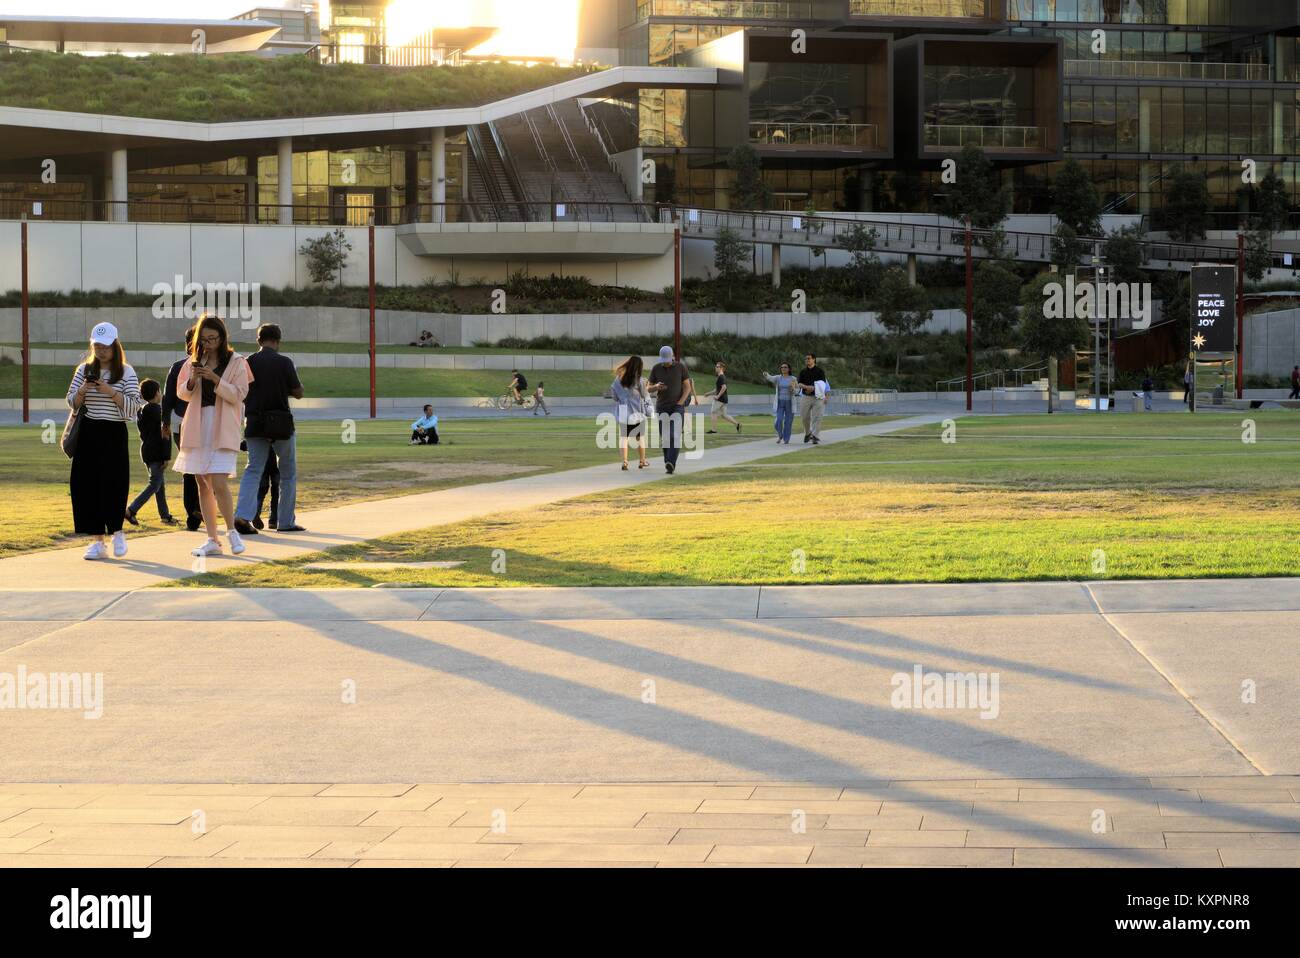 Sydney Outdoors golden hour. Busy people walking pedestrian boulevard outside International Convention Centre or ICC Sydney Darling Harbour Australia Stock Photo